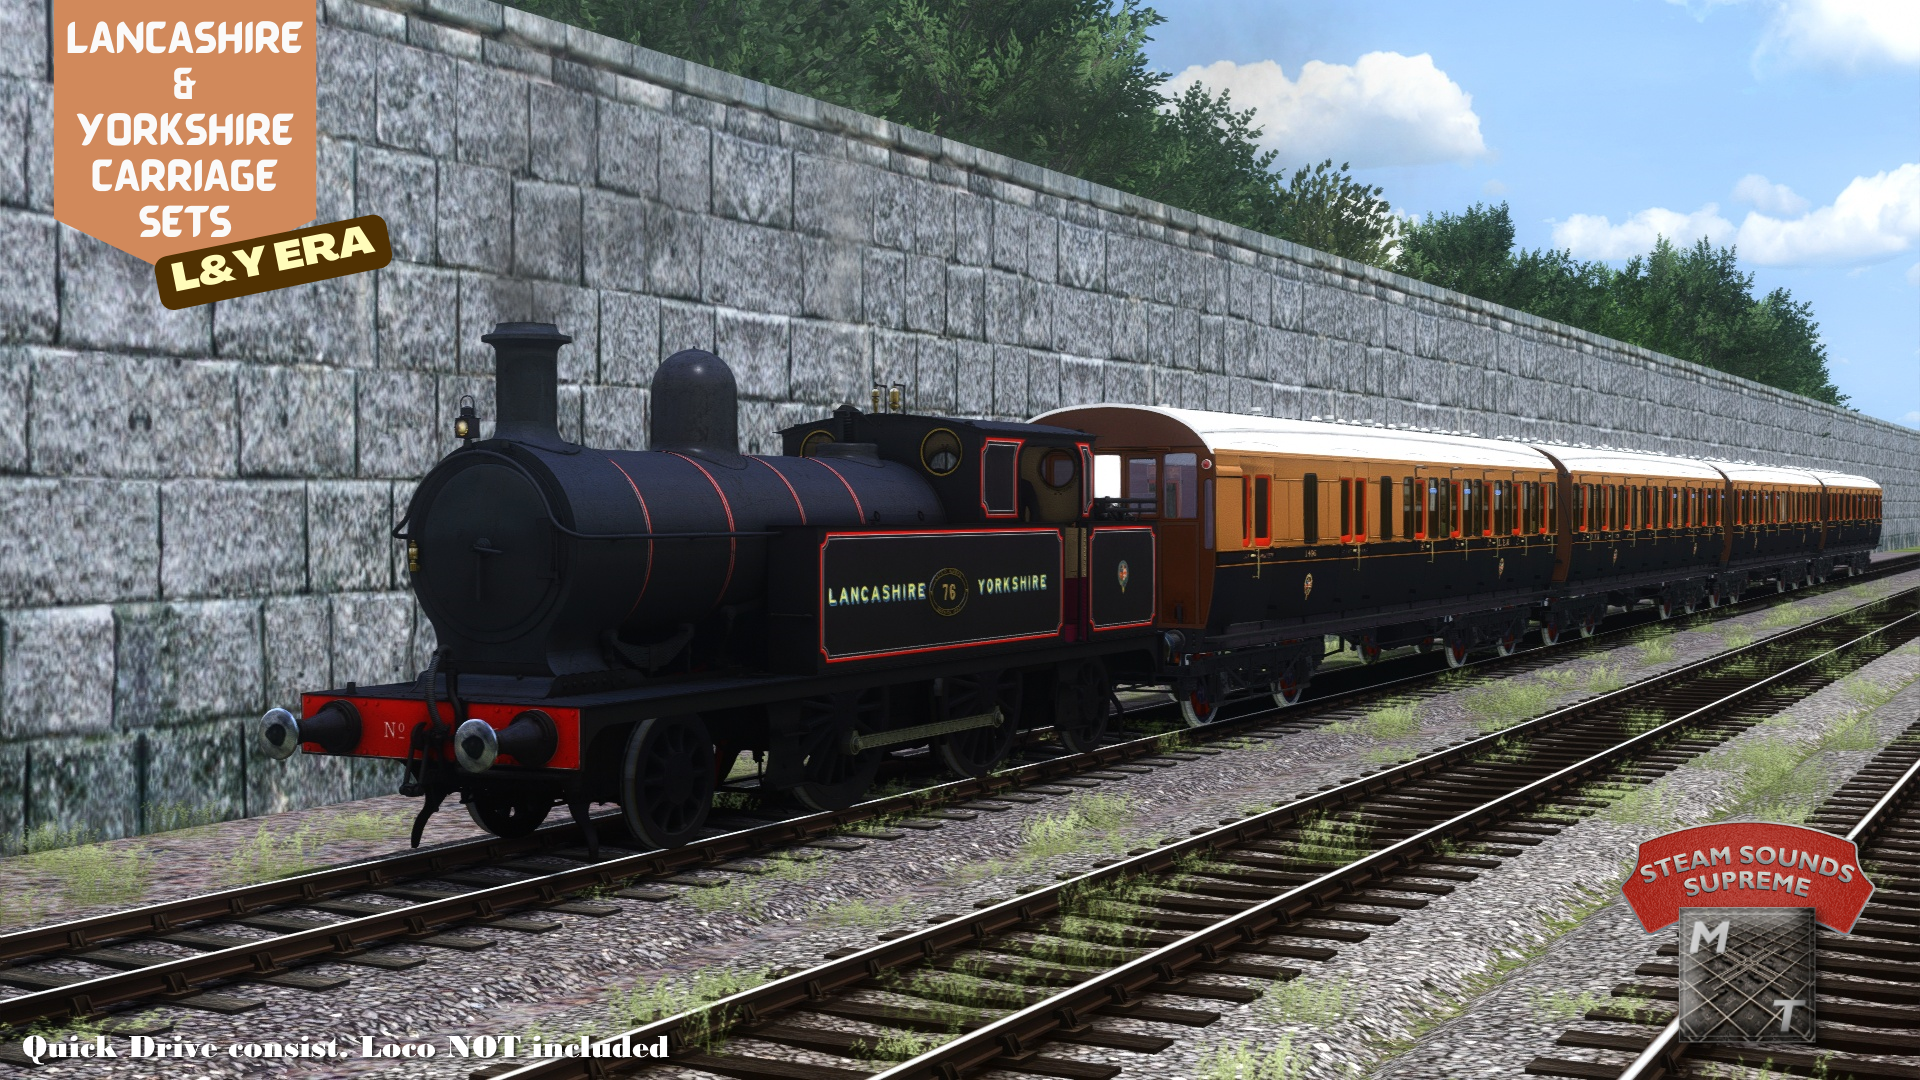 L&Y CARRIAGE SETS 15.png